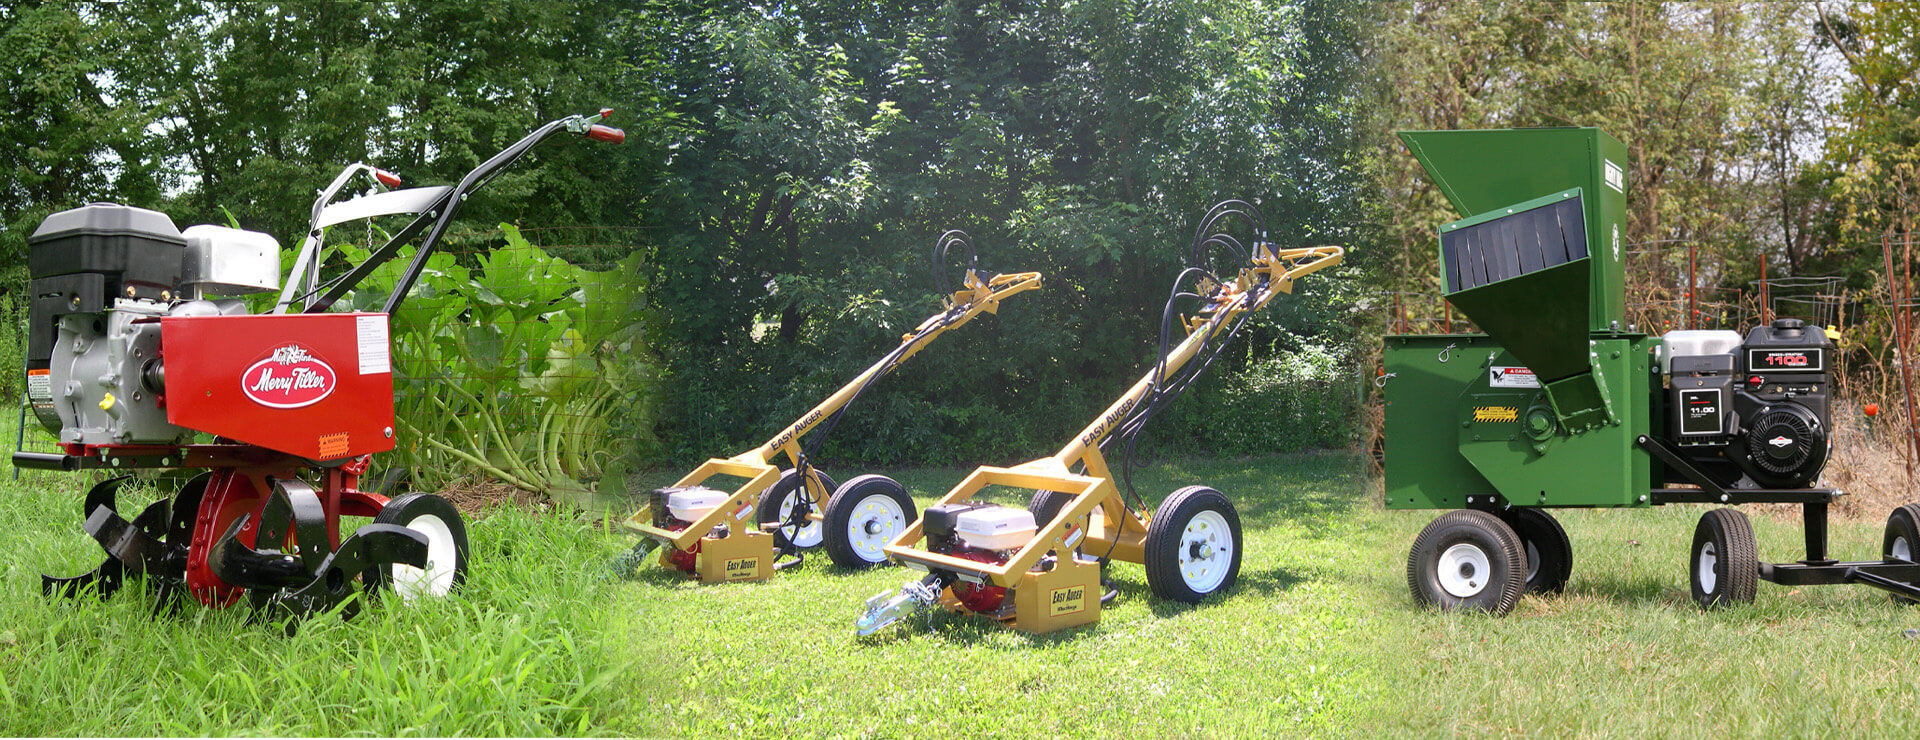 (Left to right) Merry Tiller, Easy Auger, and Mighty Mac products